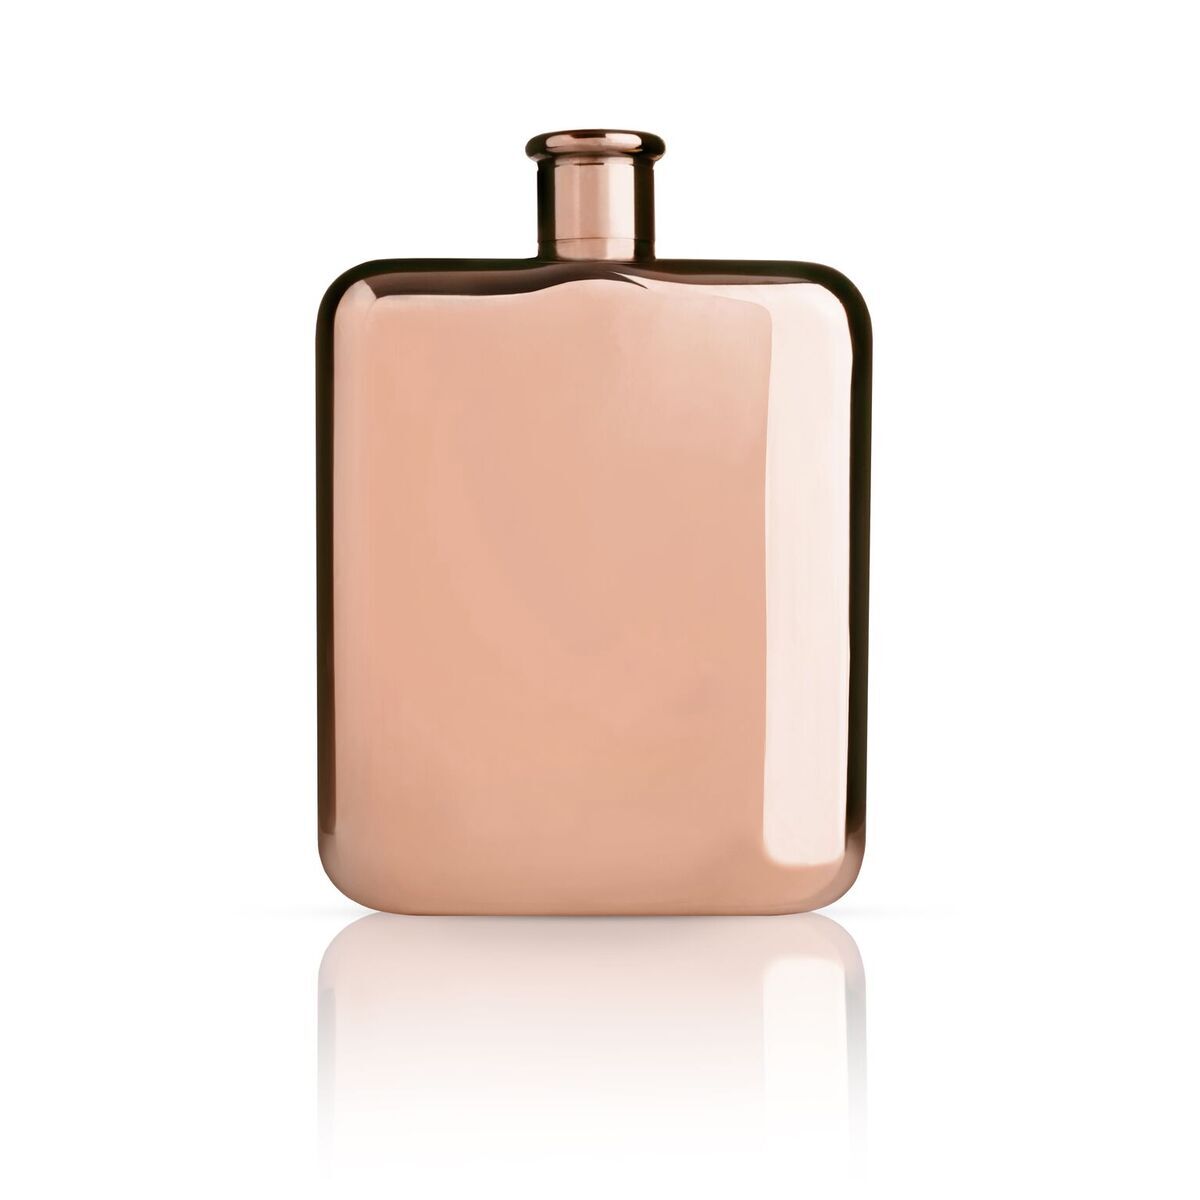 Stainless Steel Flask with Copper Finish